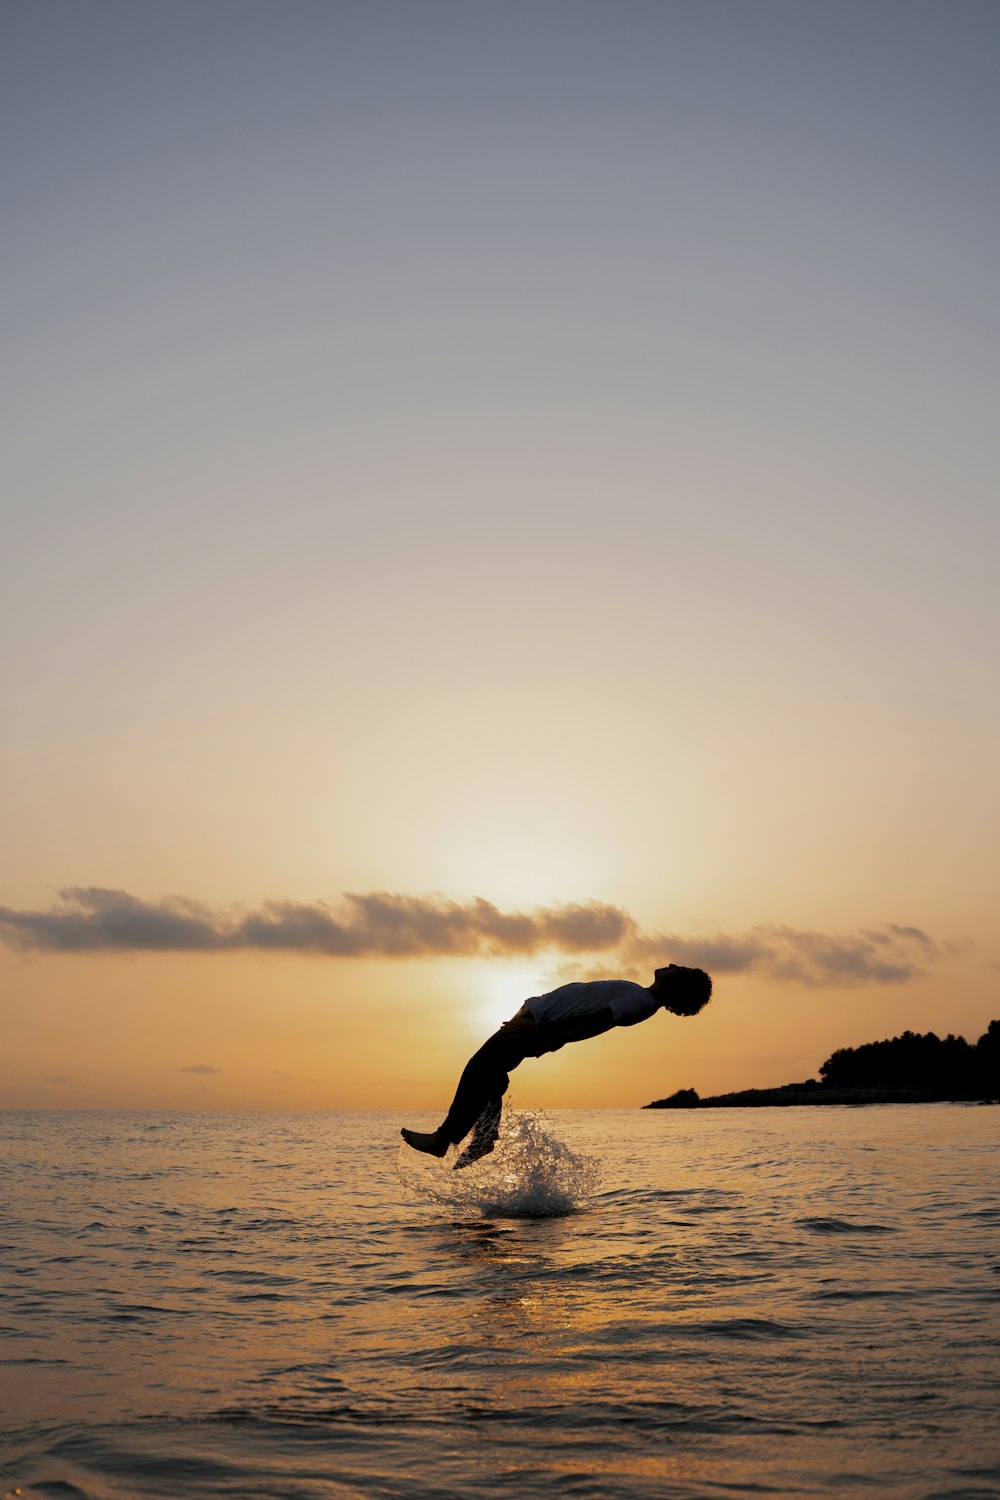 a person jumping into the water at sunset